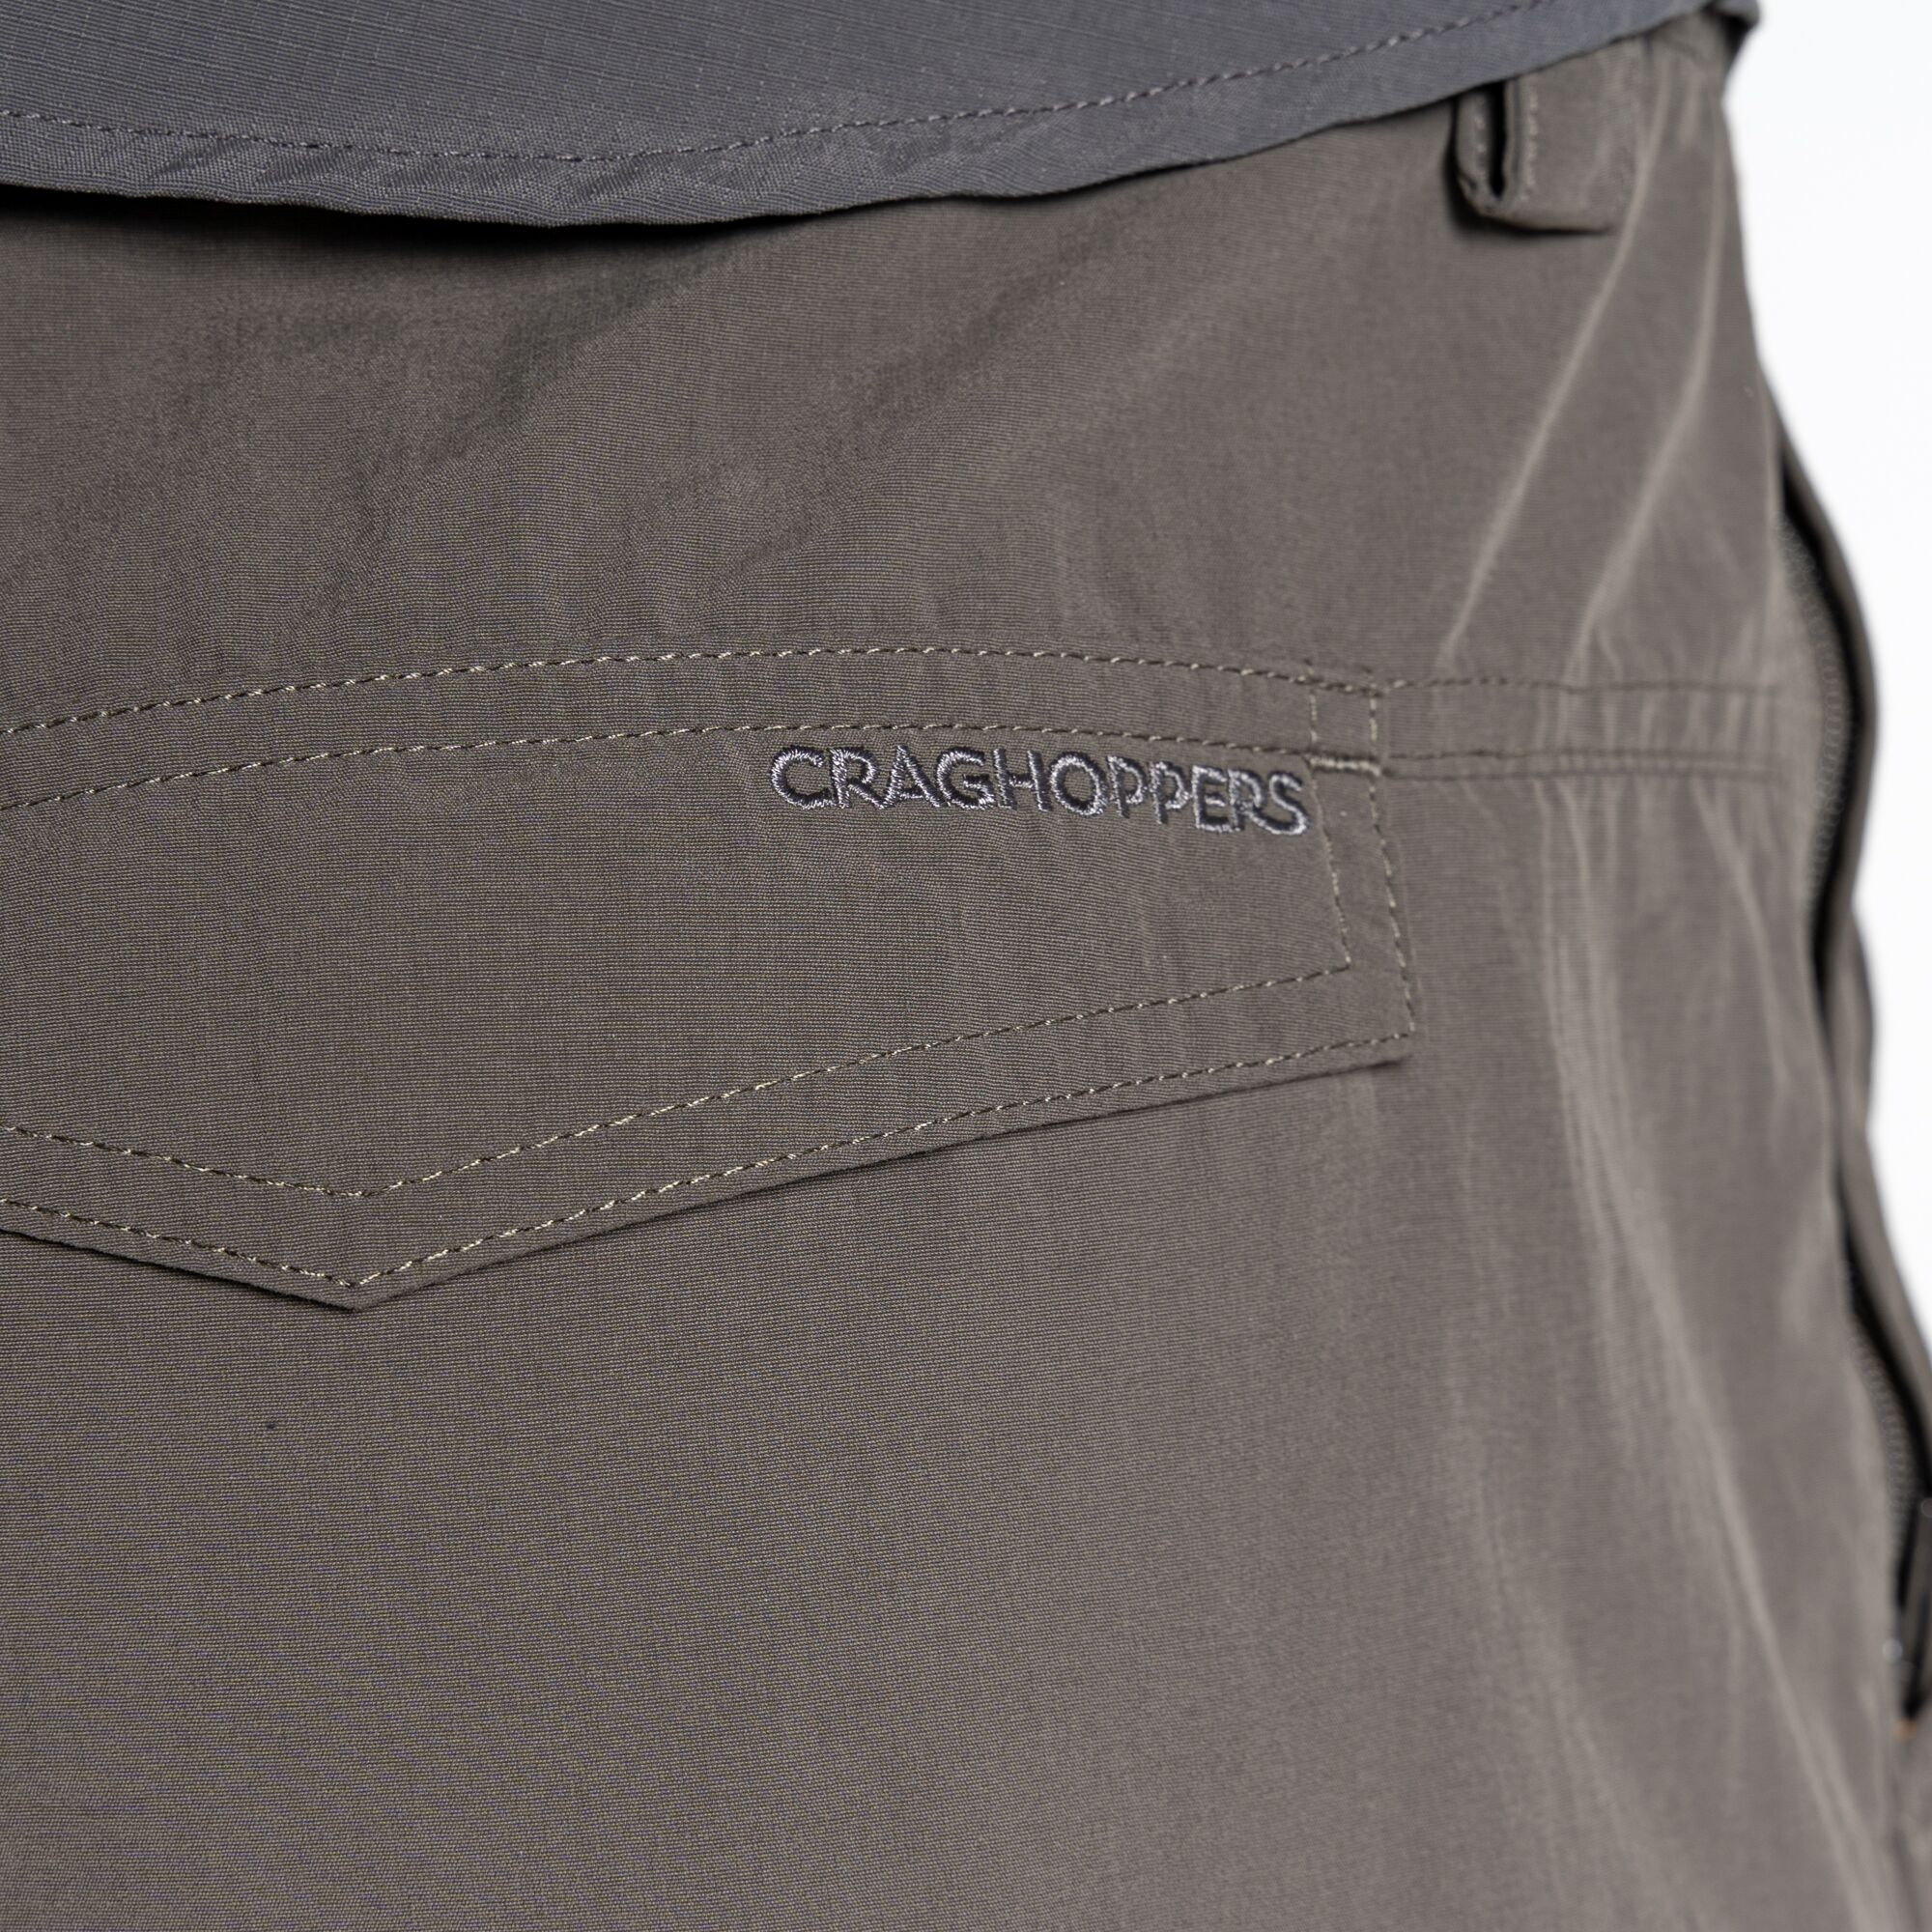 Craghoppers Men's NosiLife Convertible II Trousers